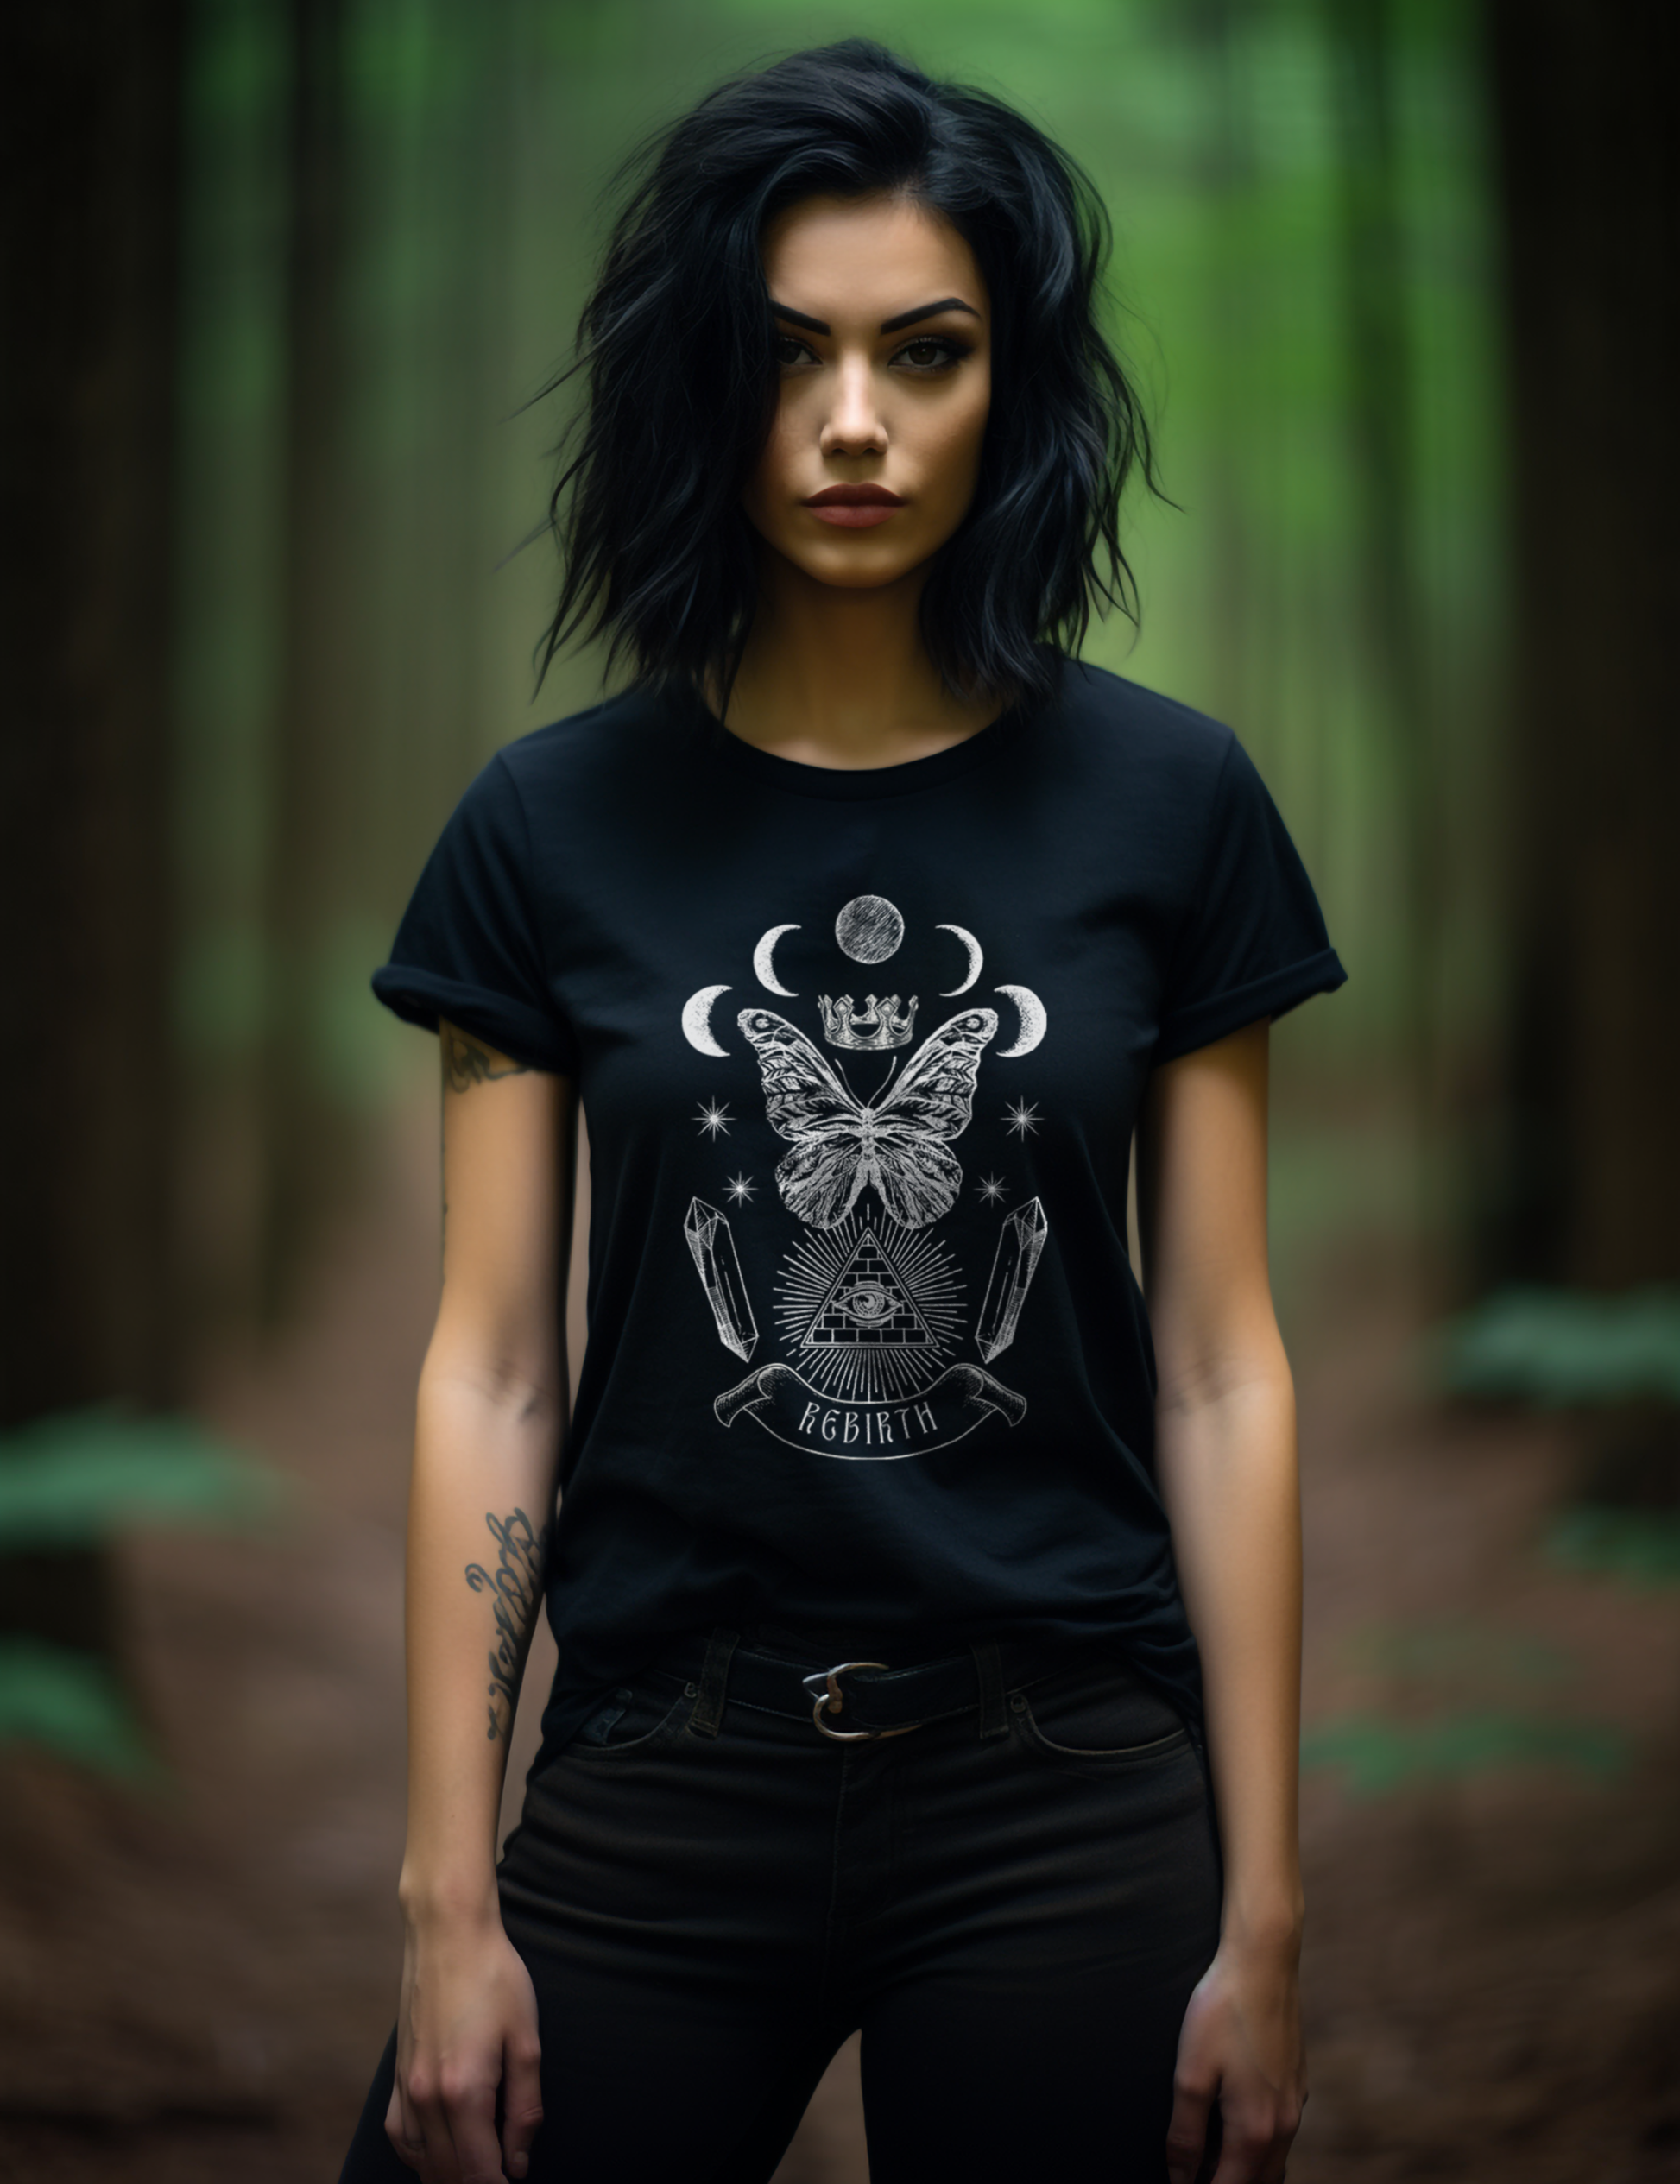 Rebirth Goth Butterly Mystical Alchemy Plus Size Witchy Clothing Shirt